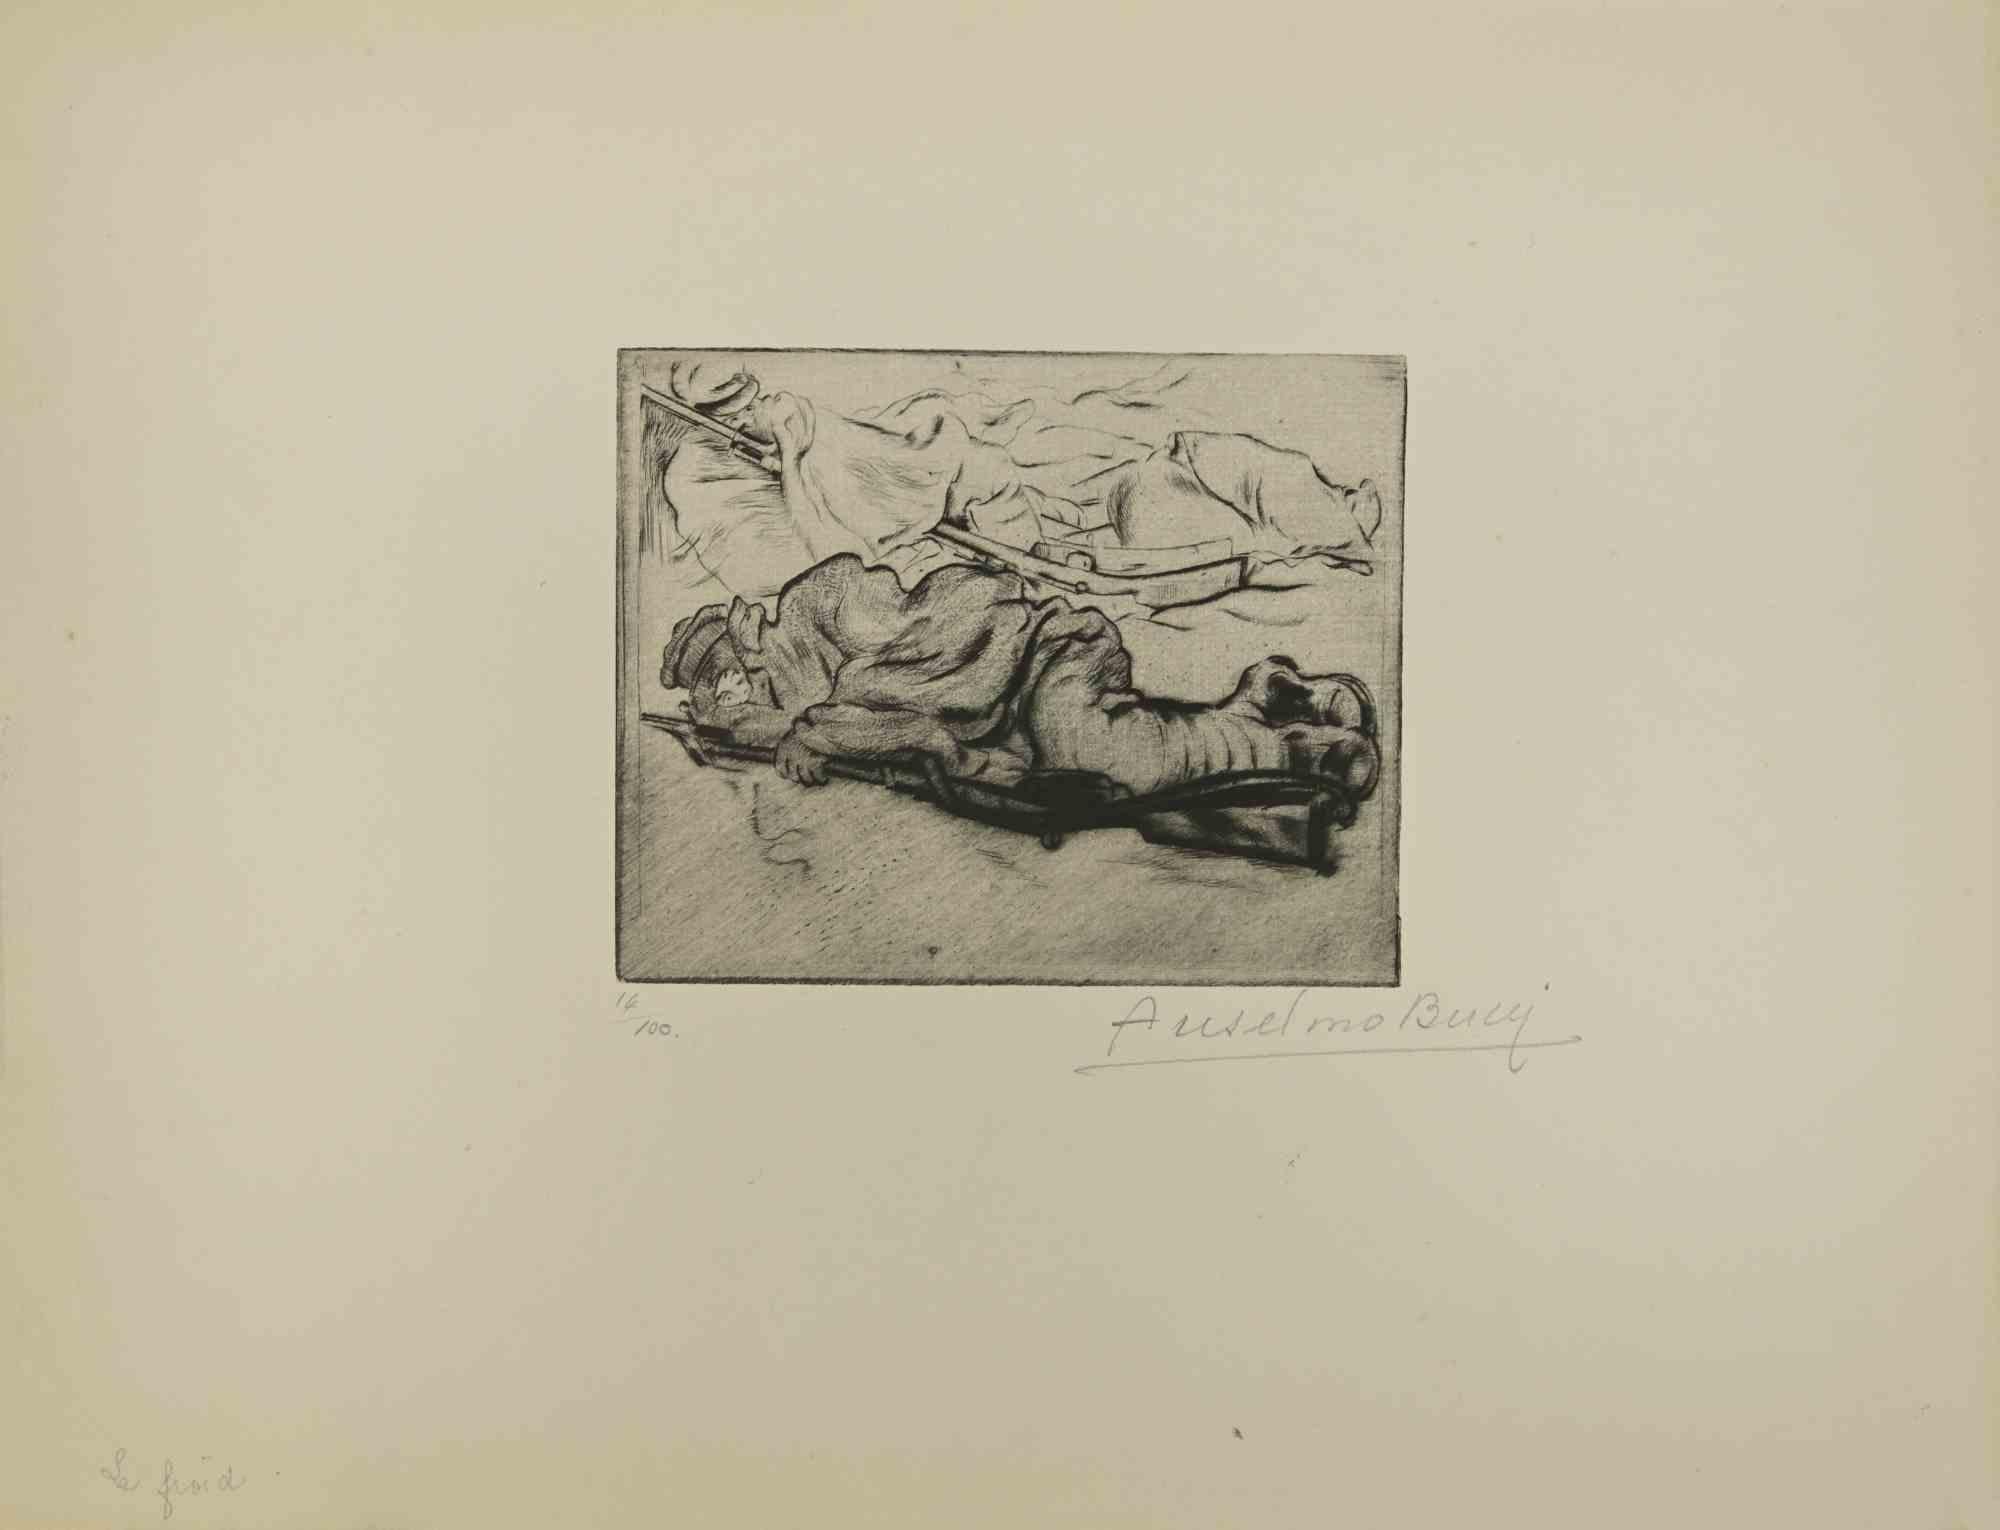 Sleep - from "Le Croquis du Front Italien" is an Artwork, Drypoint,  realized by the Italian Artist Anselmo Bucci, in 1917 s.

Hand signed on the right margin . Edition n. 14/100 specimens on Hollande paper. From the collection: “Croquis du Front